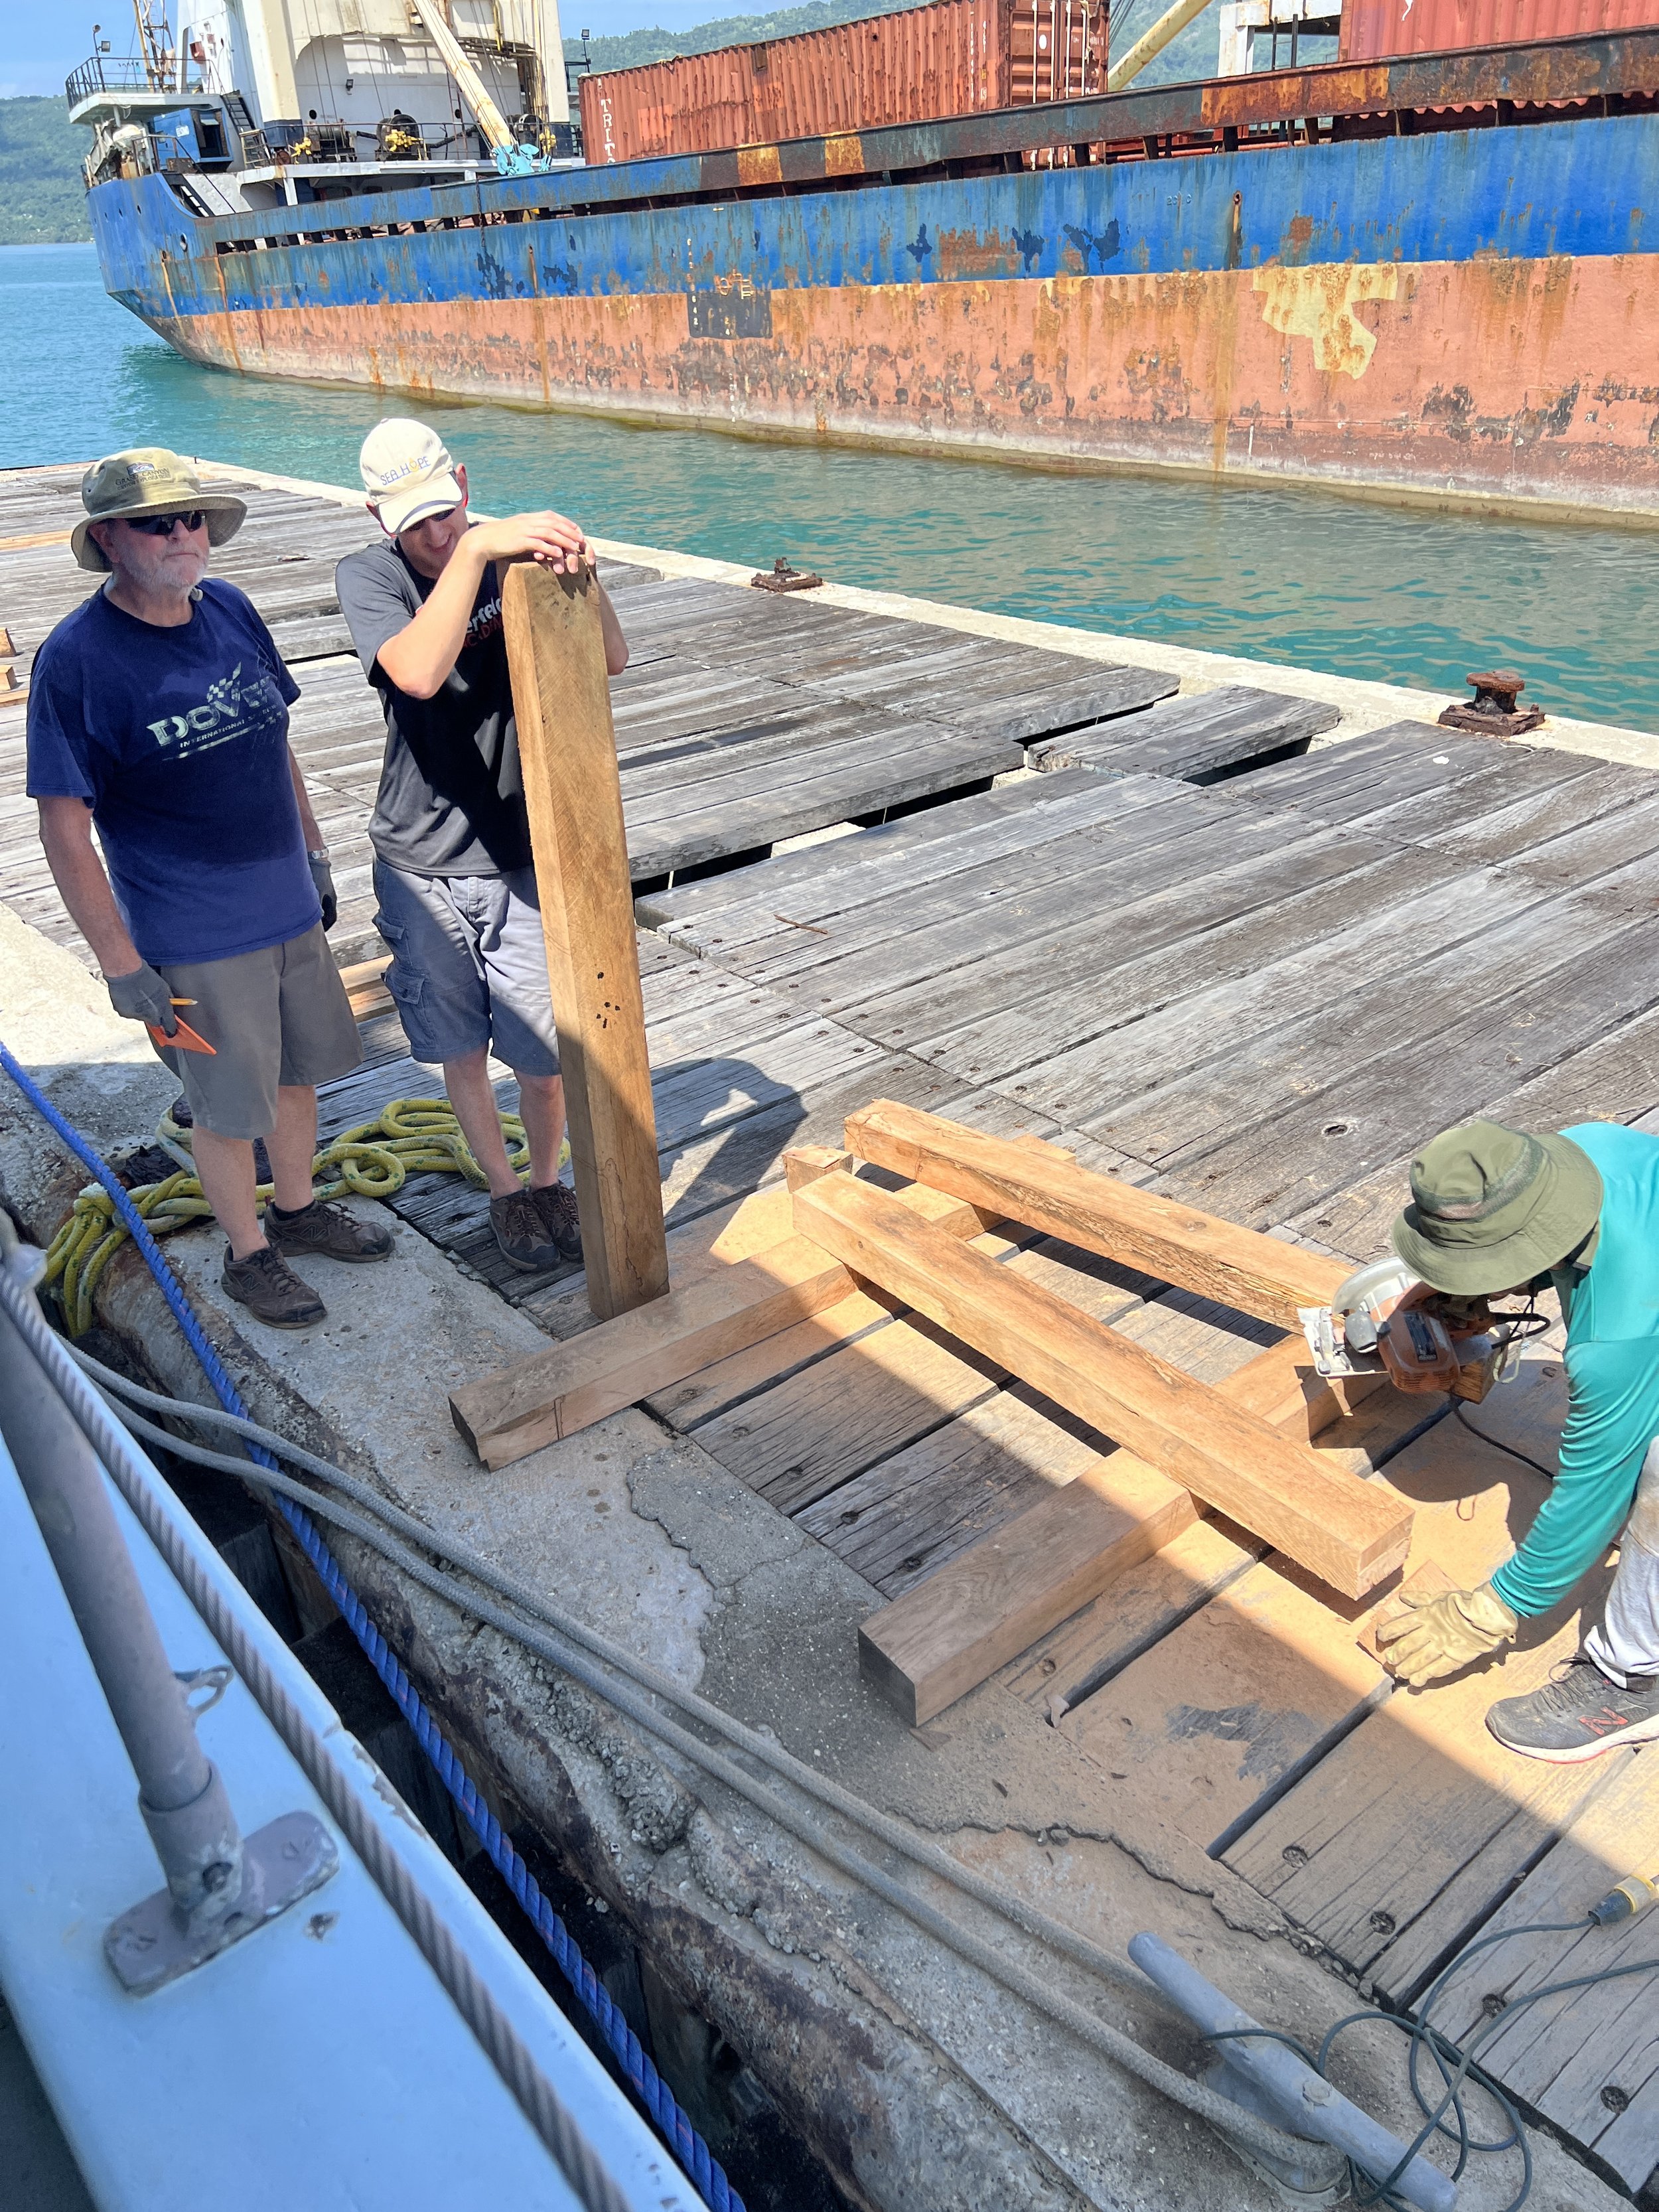  Frank Olafson, Russell Scherlie, and Cole Burge working on replacing boards on the pier in Haiti 